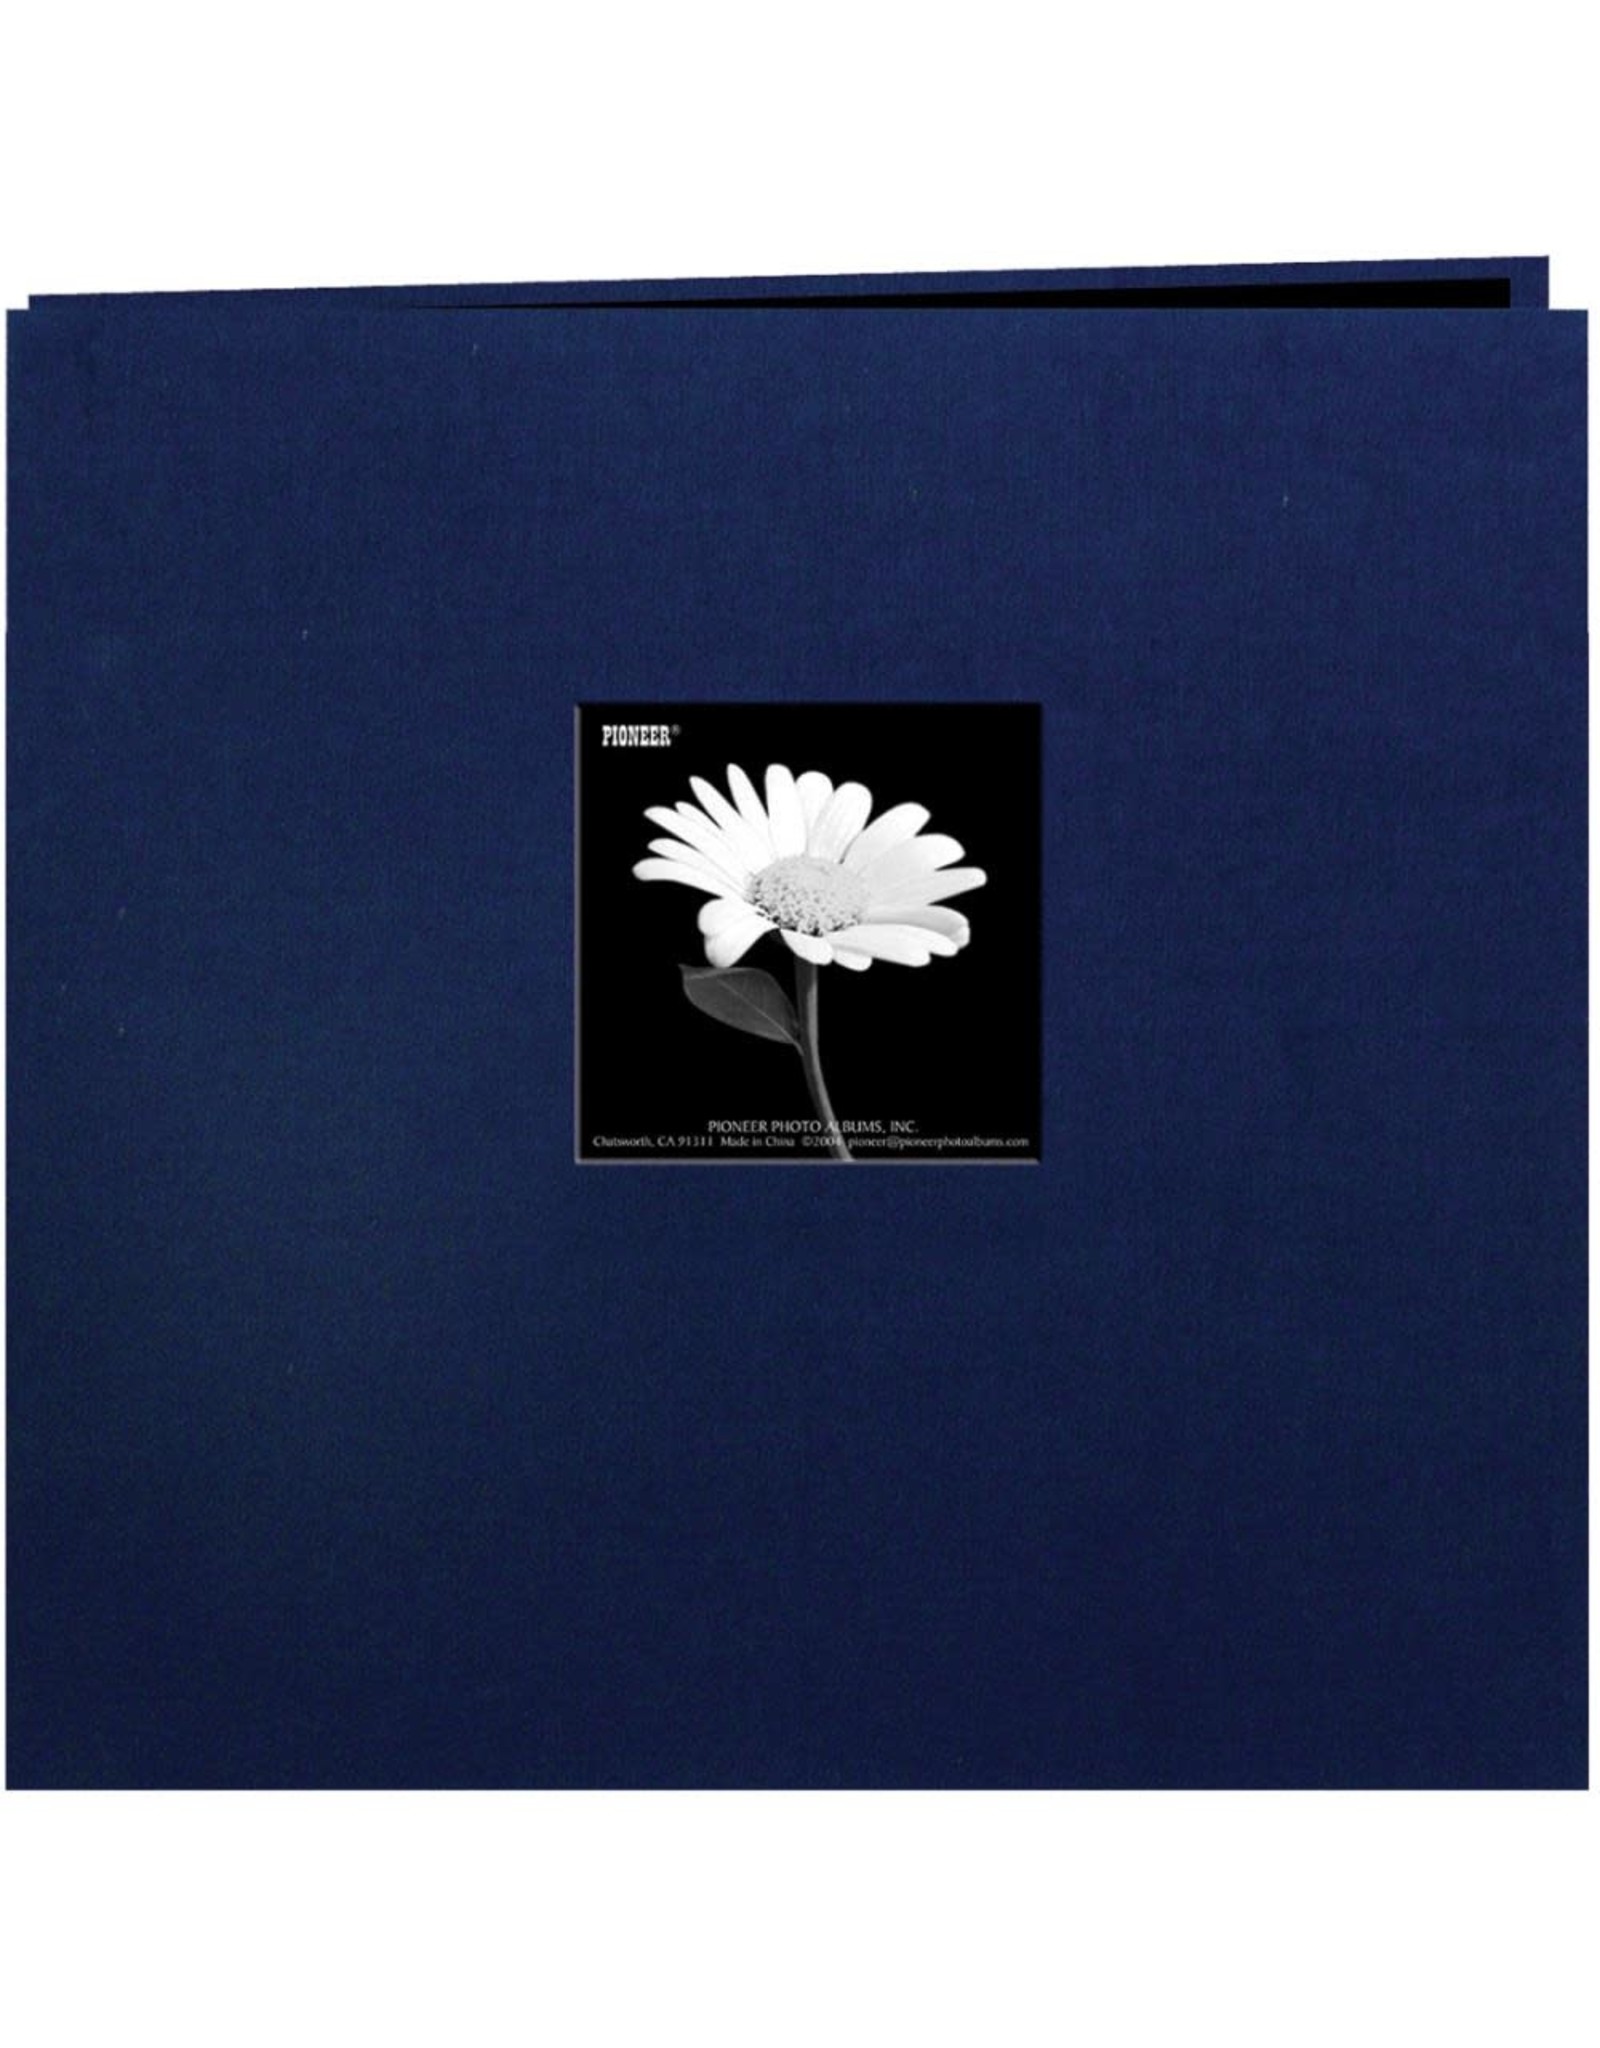 PIONEER PIONEER REGAL NAVY BOOK CLOTH COVER 8x8 POST BOUND ALBUM WITH WINDOW